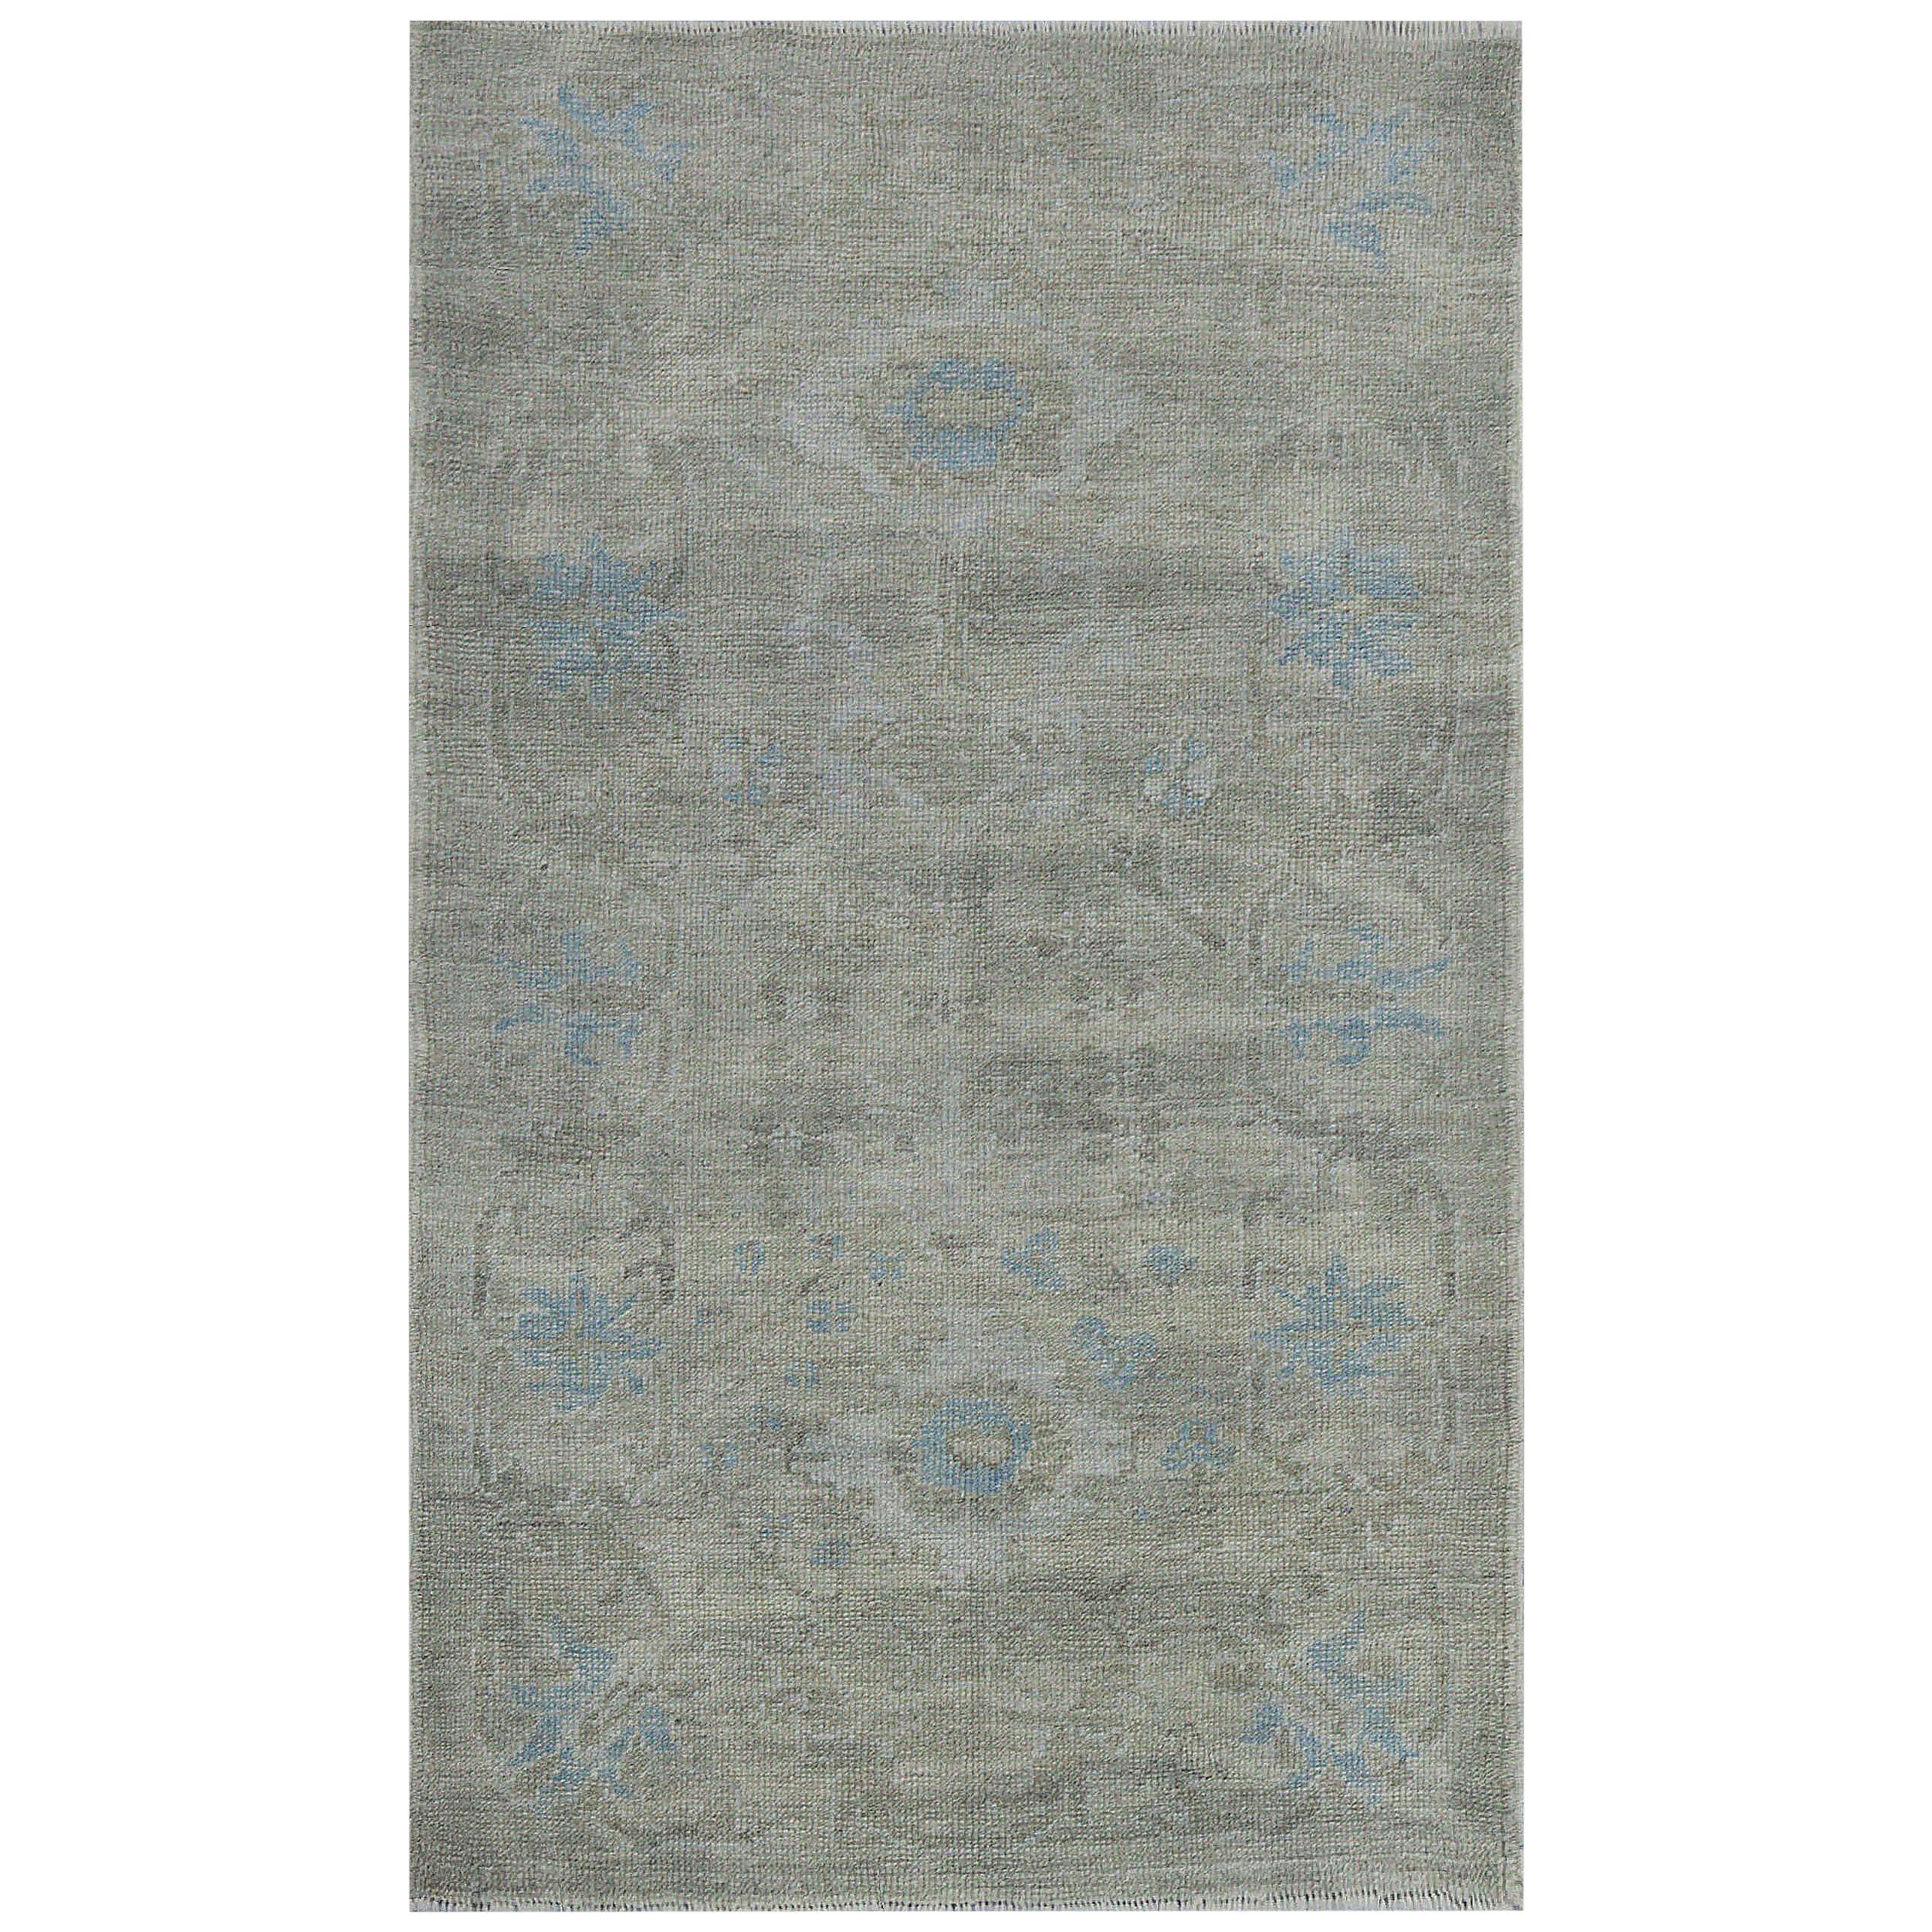 Contemporary Oushak Rug with Floral Details in Blue and Gray on Beige Field